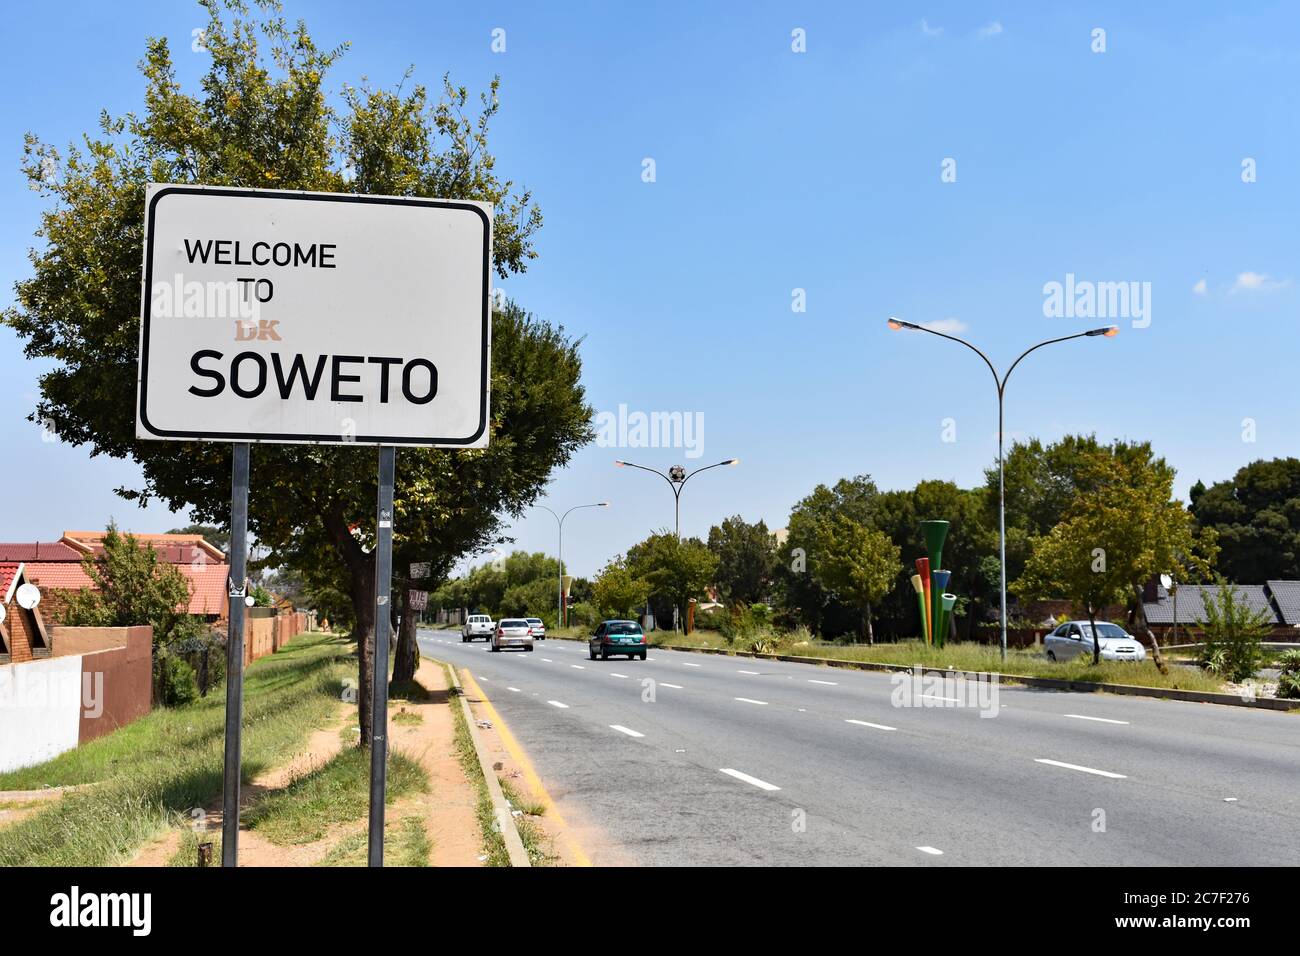 The welcome to Soweto sign along one of the main roads into the township. Cars visible driving past on a clear day.  Johannesburg, South Africa Stock Photo